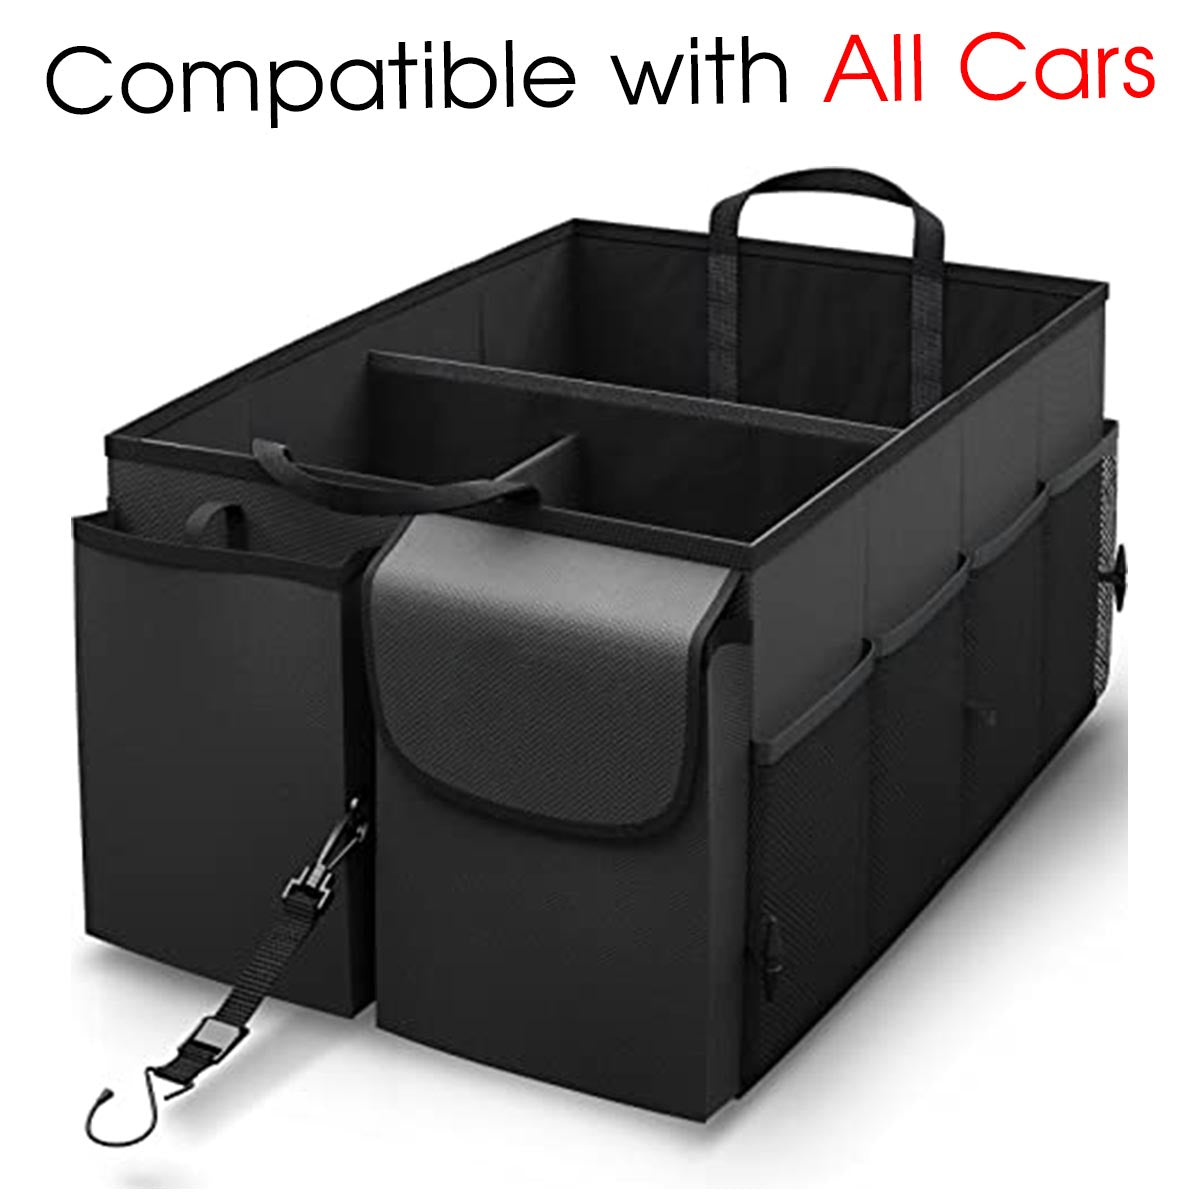 Car Trunk Organizer - Collapsible, Custom fit for All Cars, Multi-Compartment Automotive SUV Car Organizer for Storage w/ Adjustable Straps - Car Accessories for Women and Men HY12993